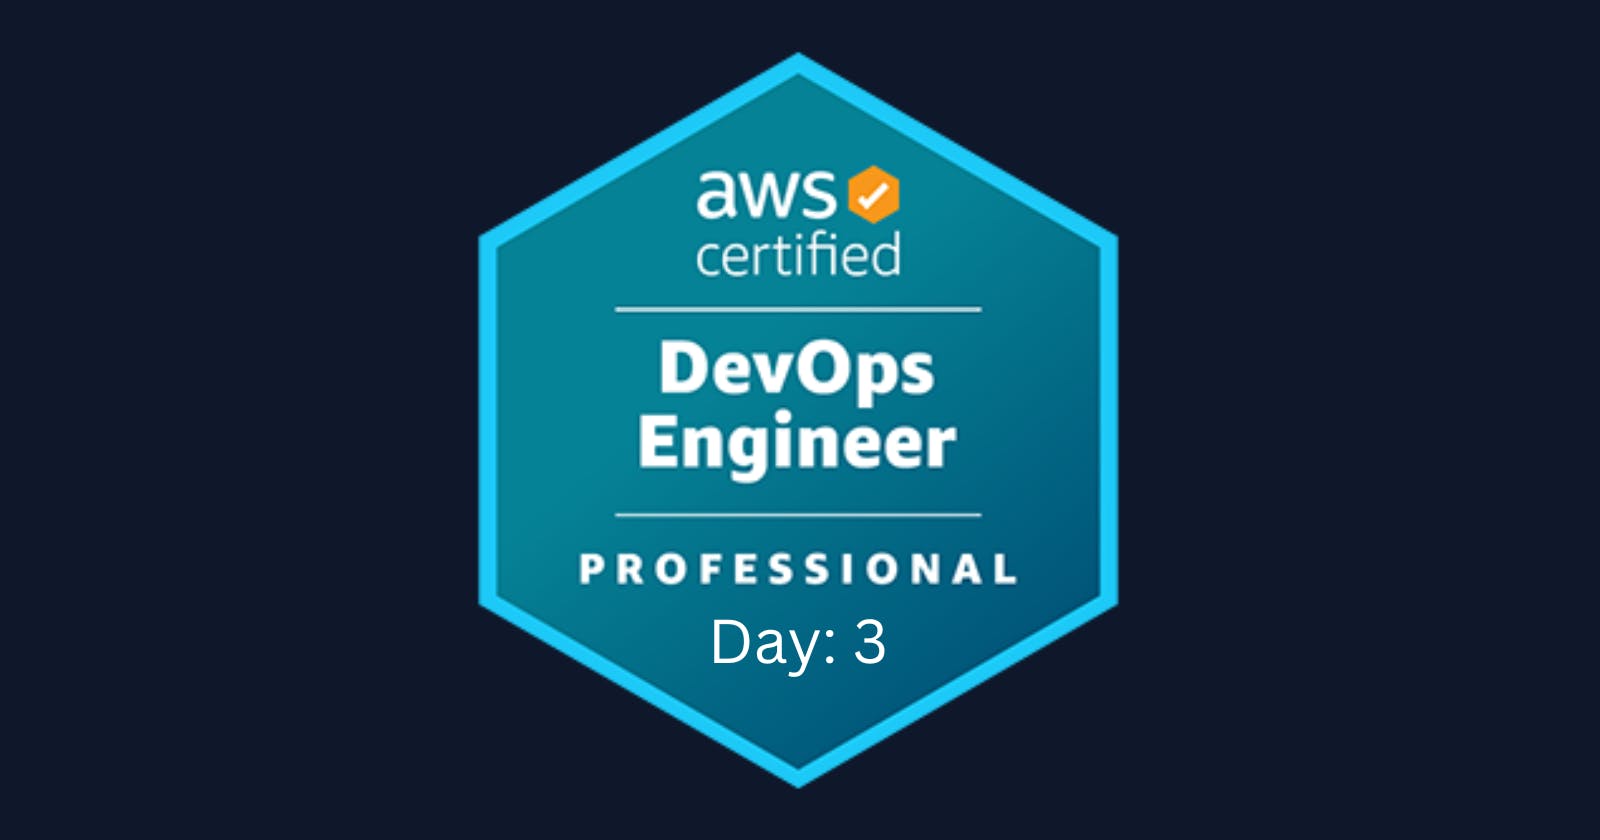 🚀 Exciting Day 3 of My AWS DevOps Engineer Professional Journey! 🚀